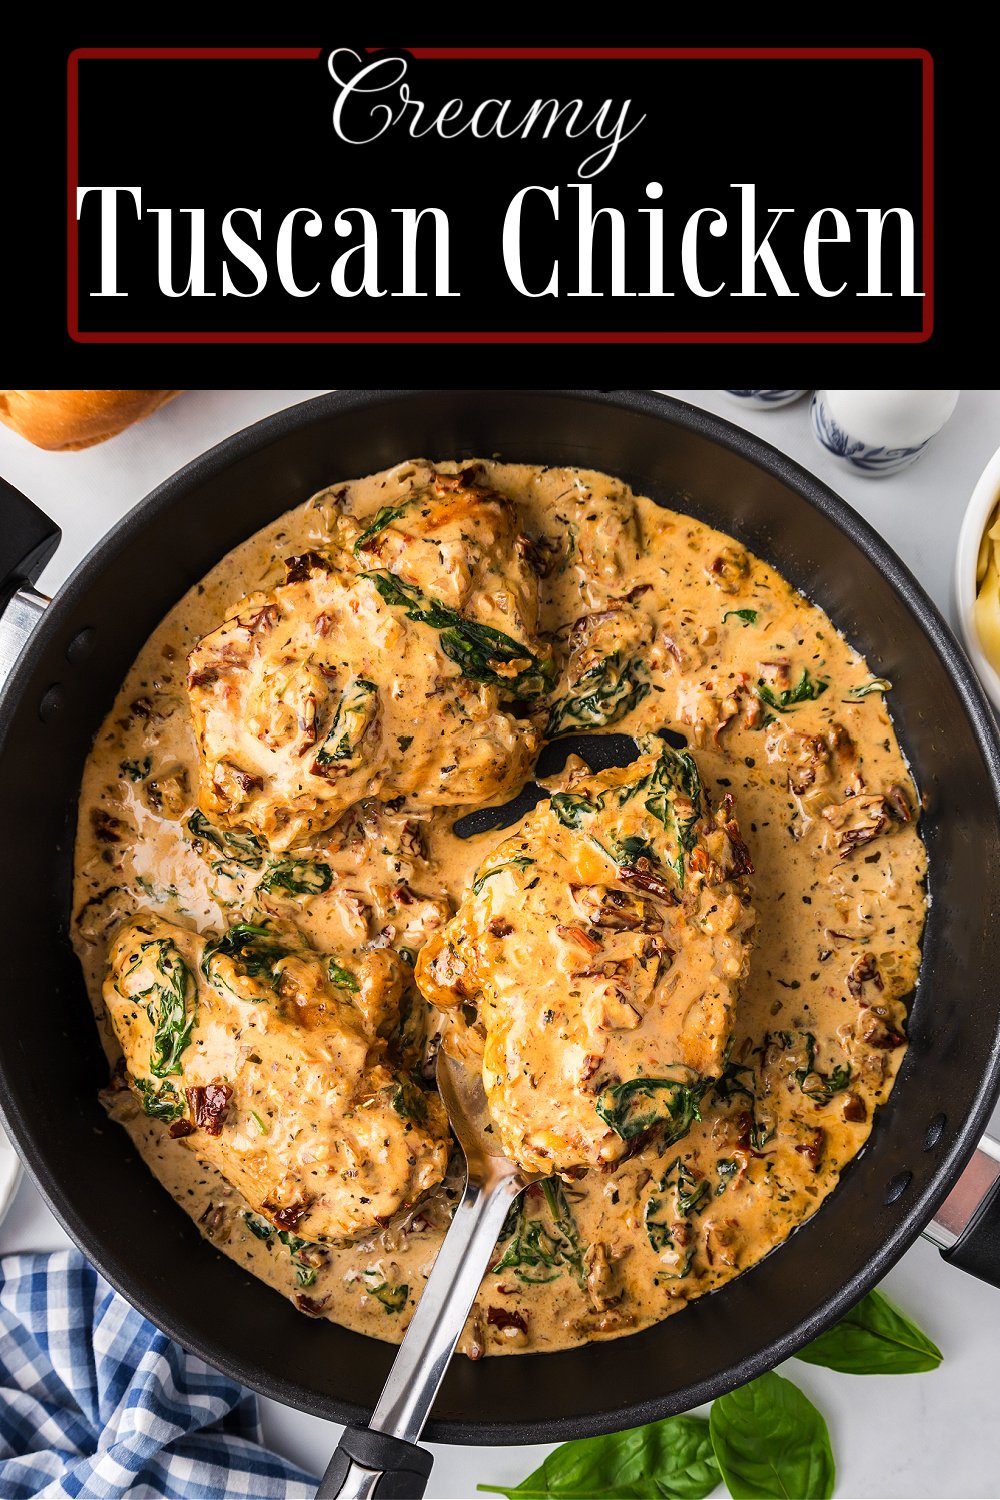 Serve this Italian inspired Tuscan Chicken recipe over pasta smothered with the robust sun dried tomato and spinach cream sauce. #tuscanchicken #easychickenrecipes #chickenbreastrecipes #Italianfood #Italianchicken #sundriedtomatosauce via @melissasssk